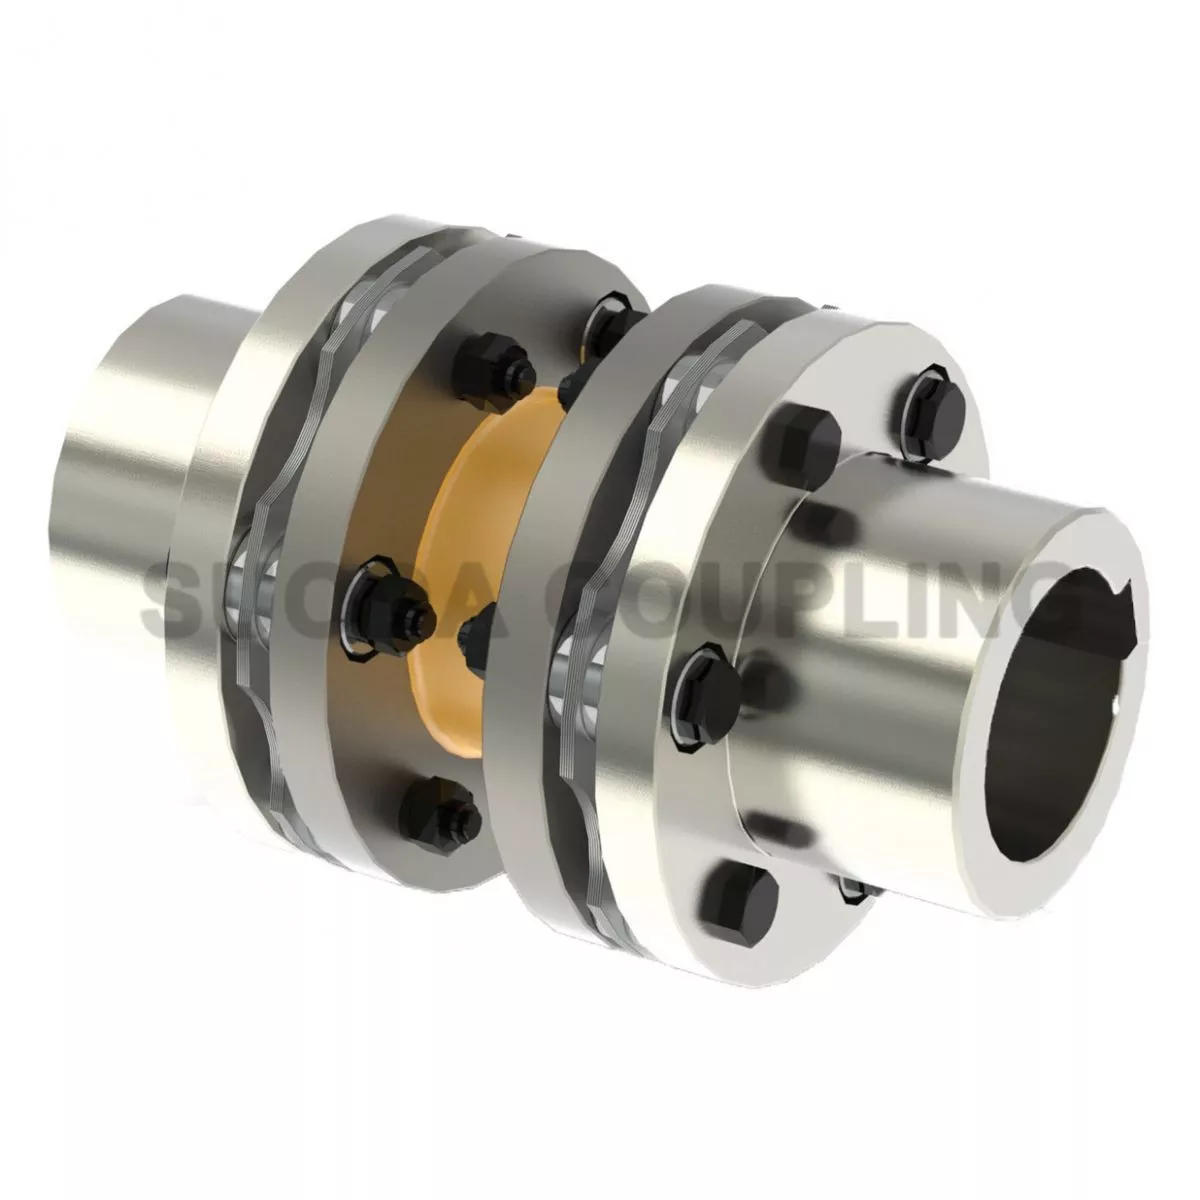 Model Selection of Disc Couplings